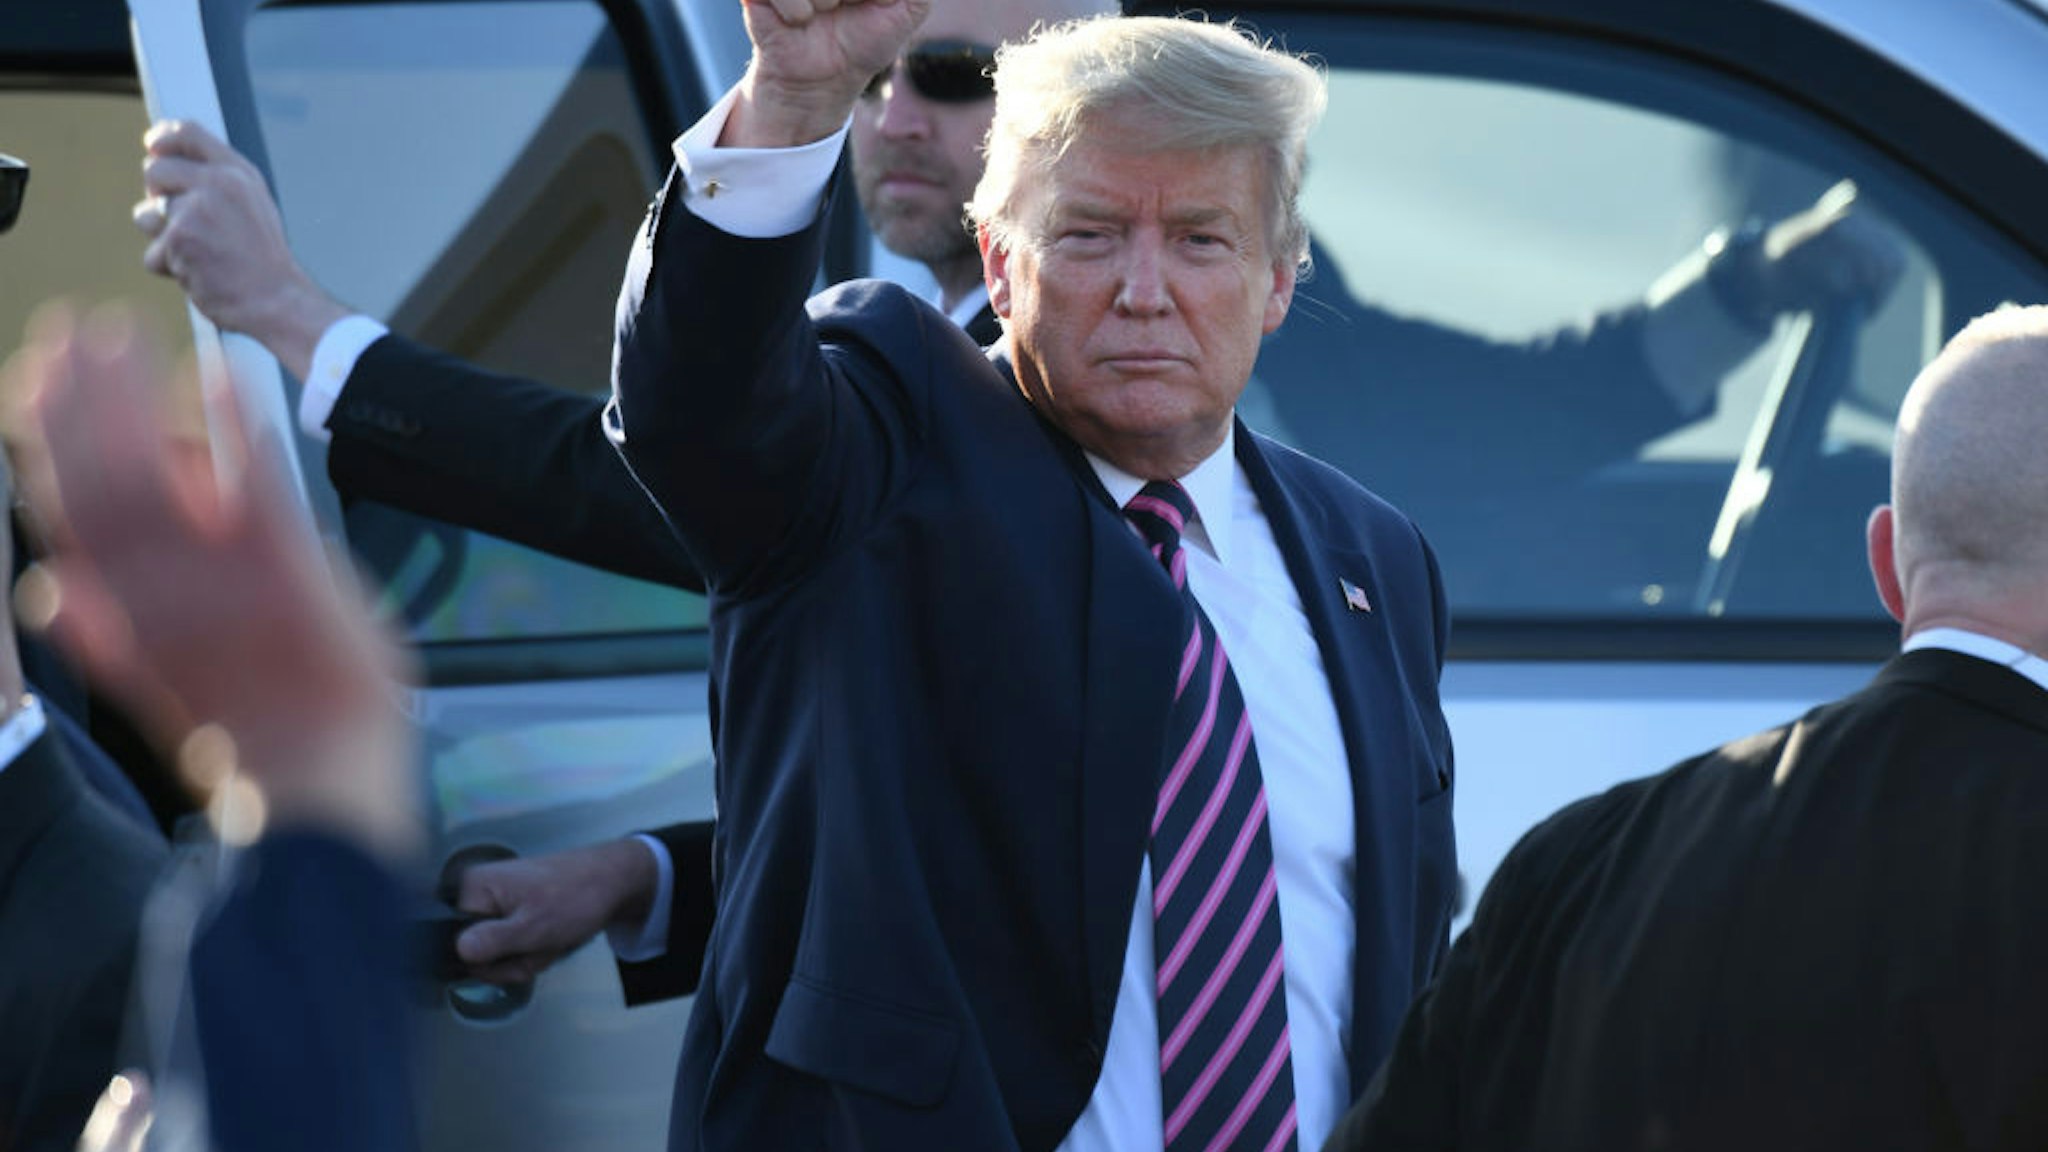 U.S. President Donald Trump motions to supporters after arriving on Air Force One at LAX Airport on February 18, 2020 in Los Angeles, California.